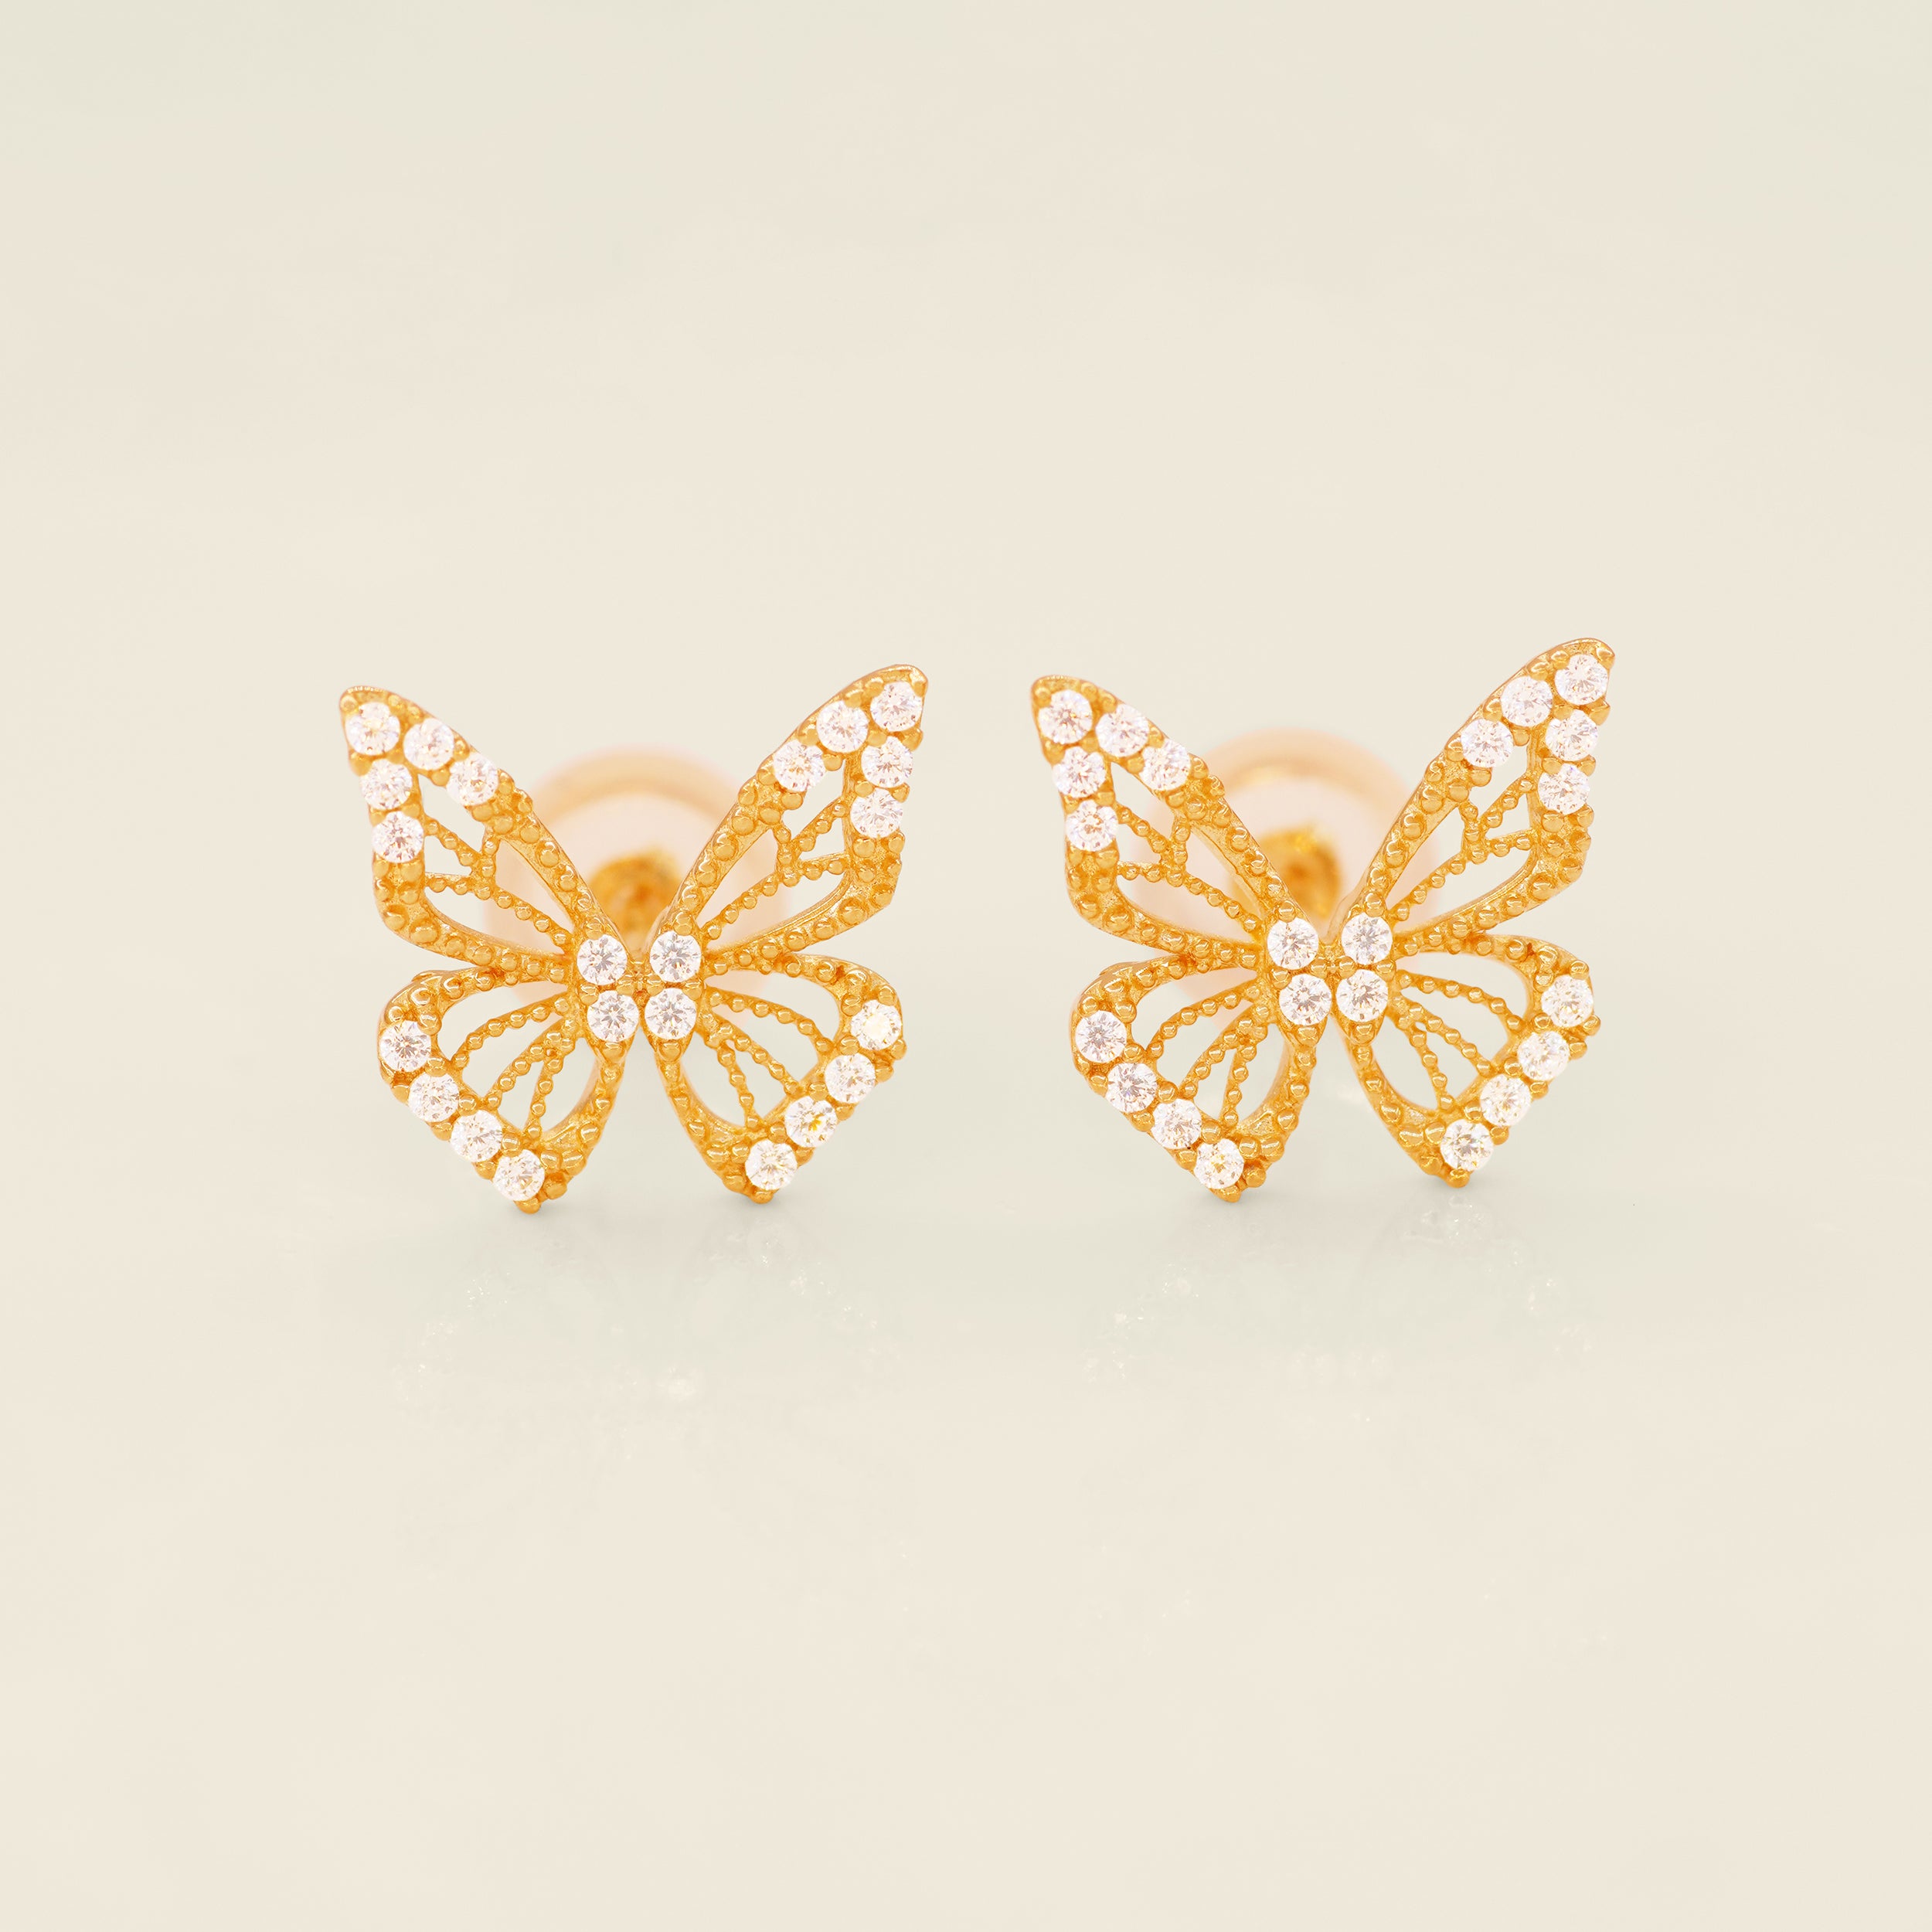 14K Solid Gold Medium CZ Butterfly Stud Earrings - Anygolds 